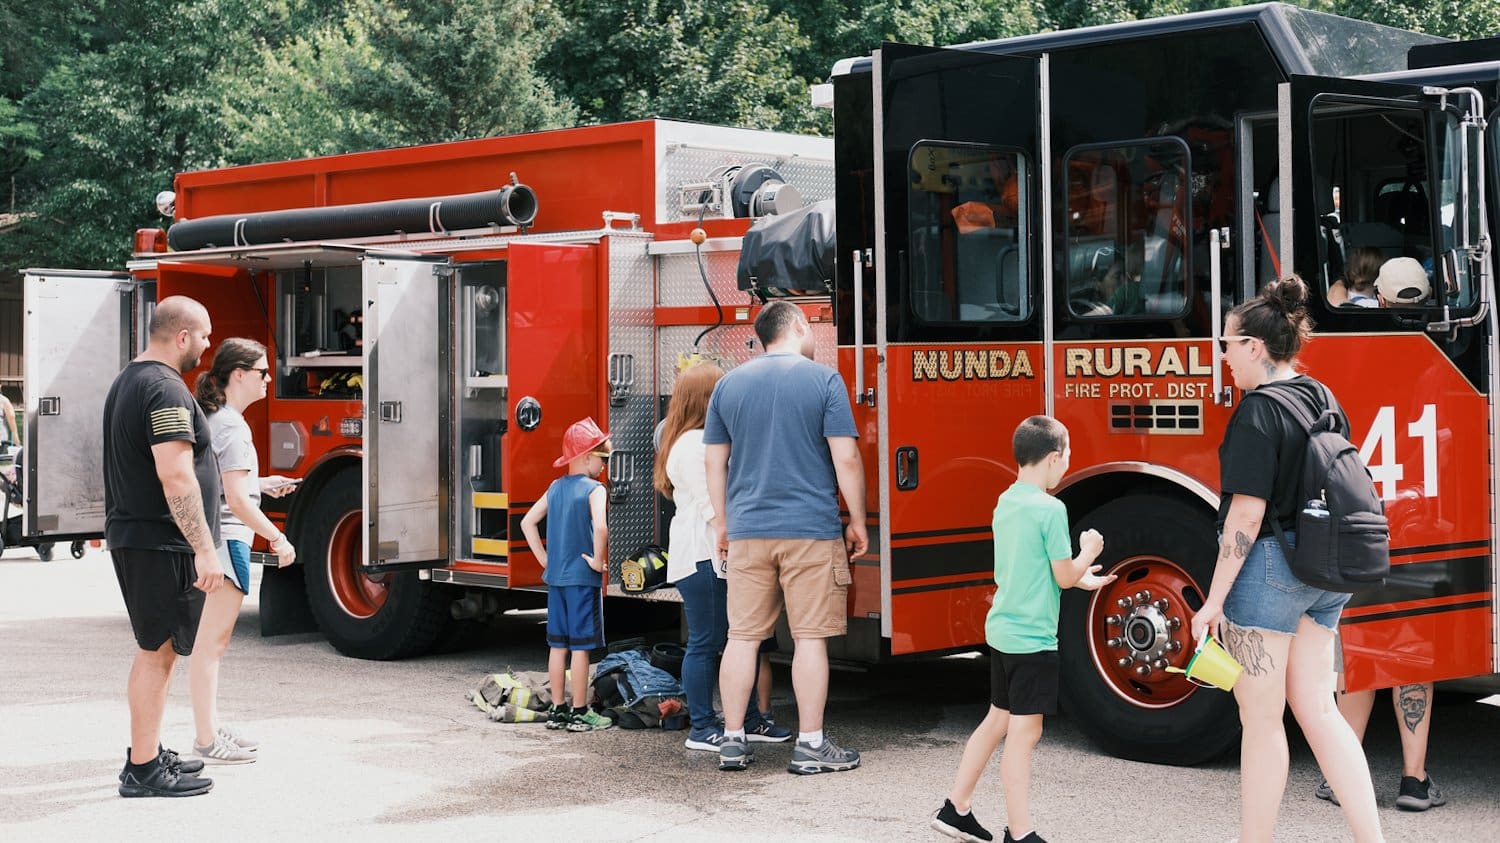 Kids checking out the fire engine and equipment.